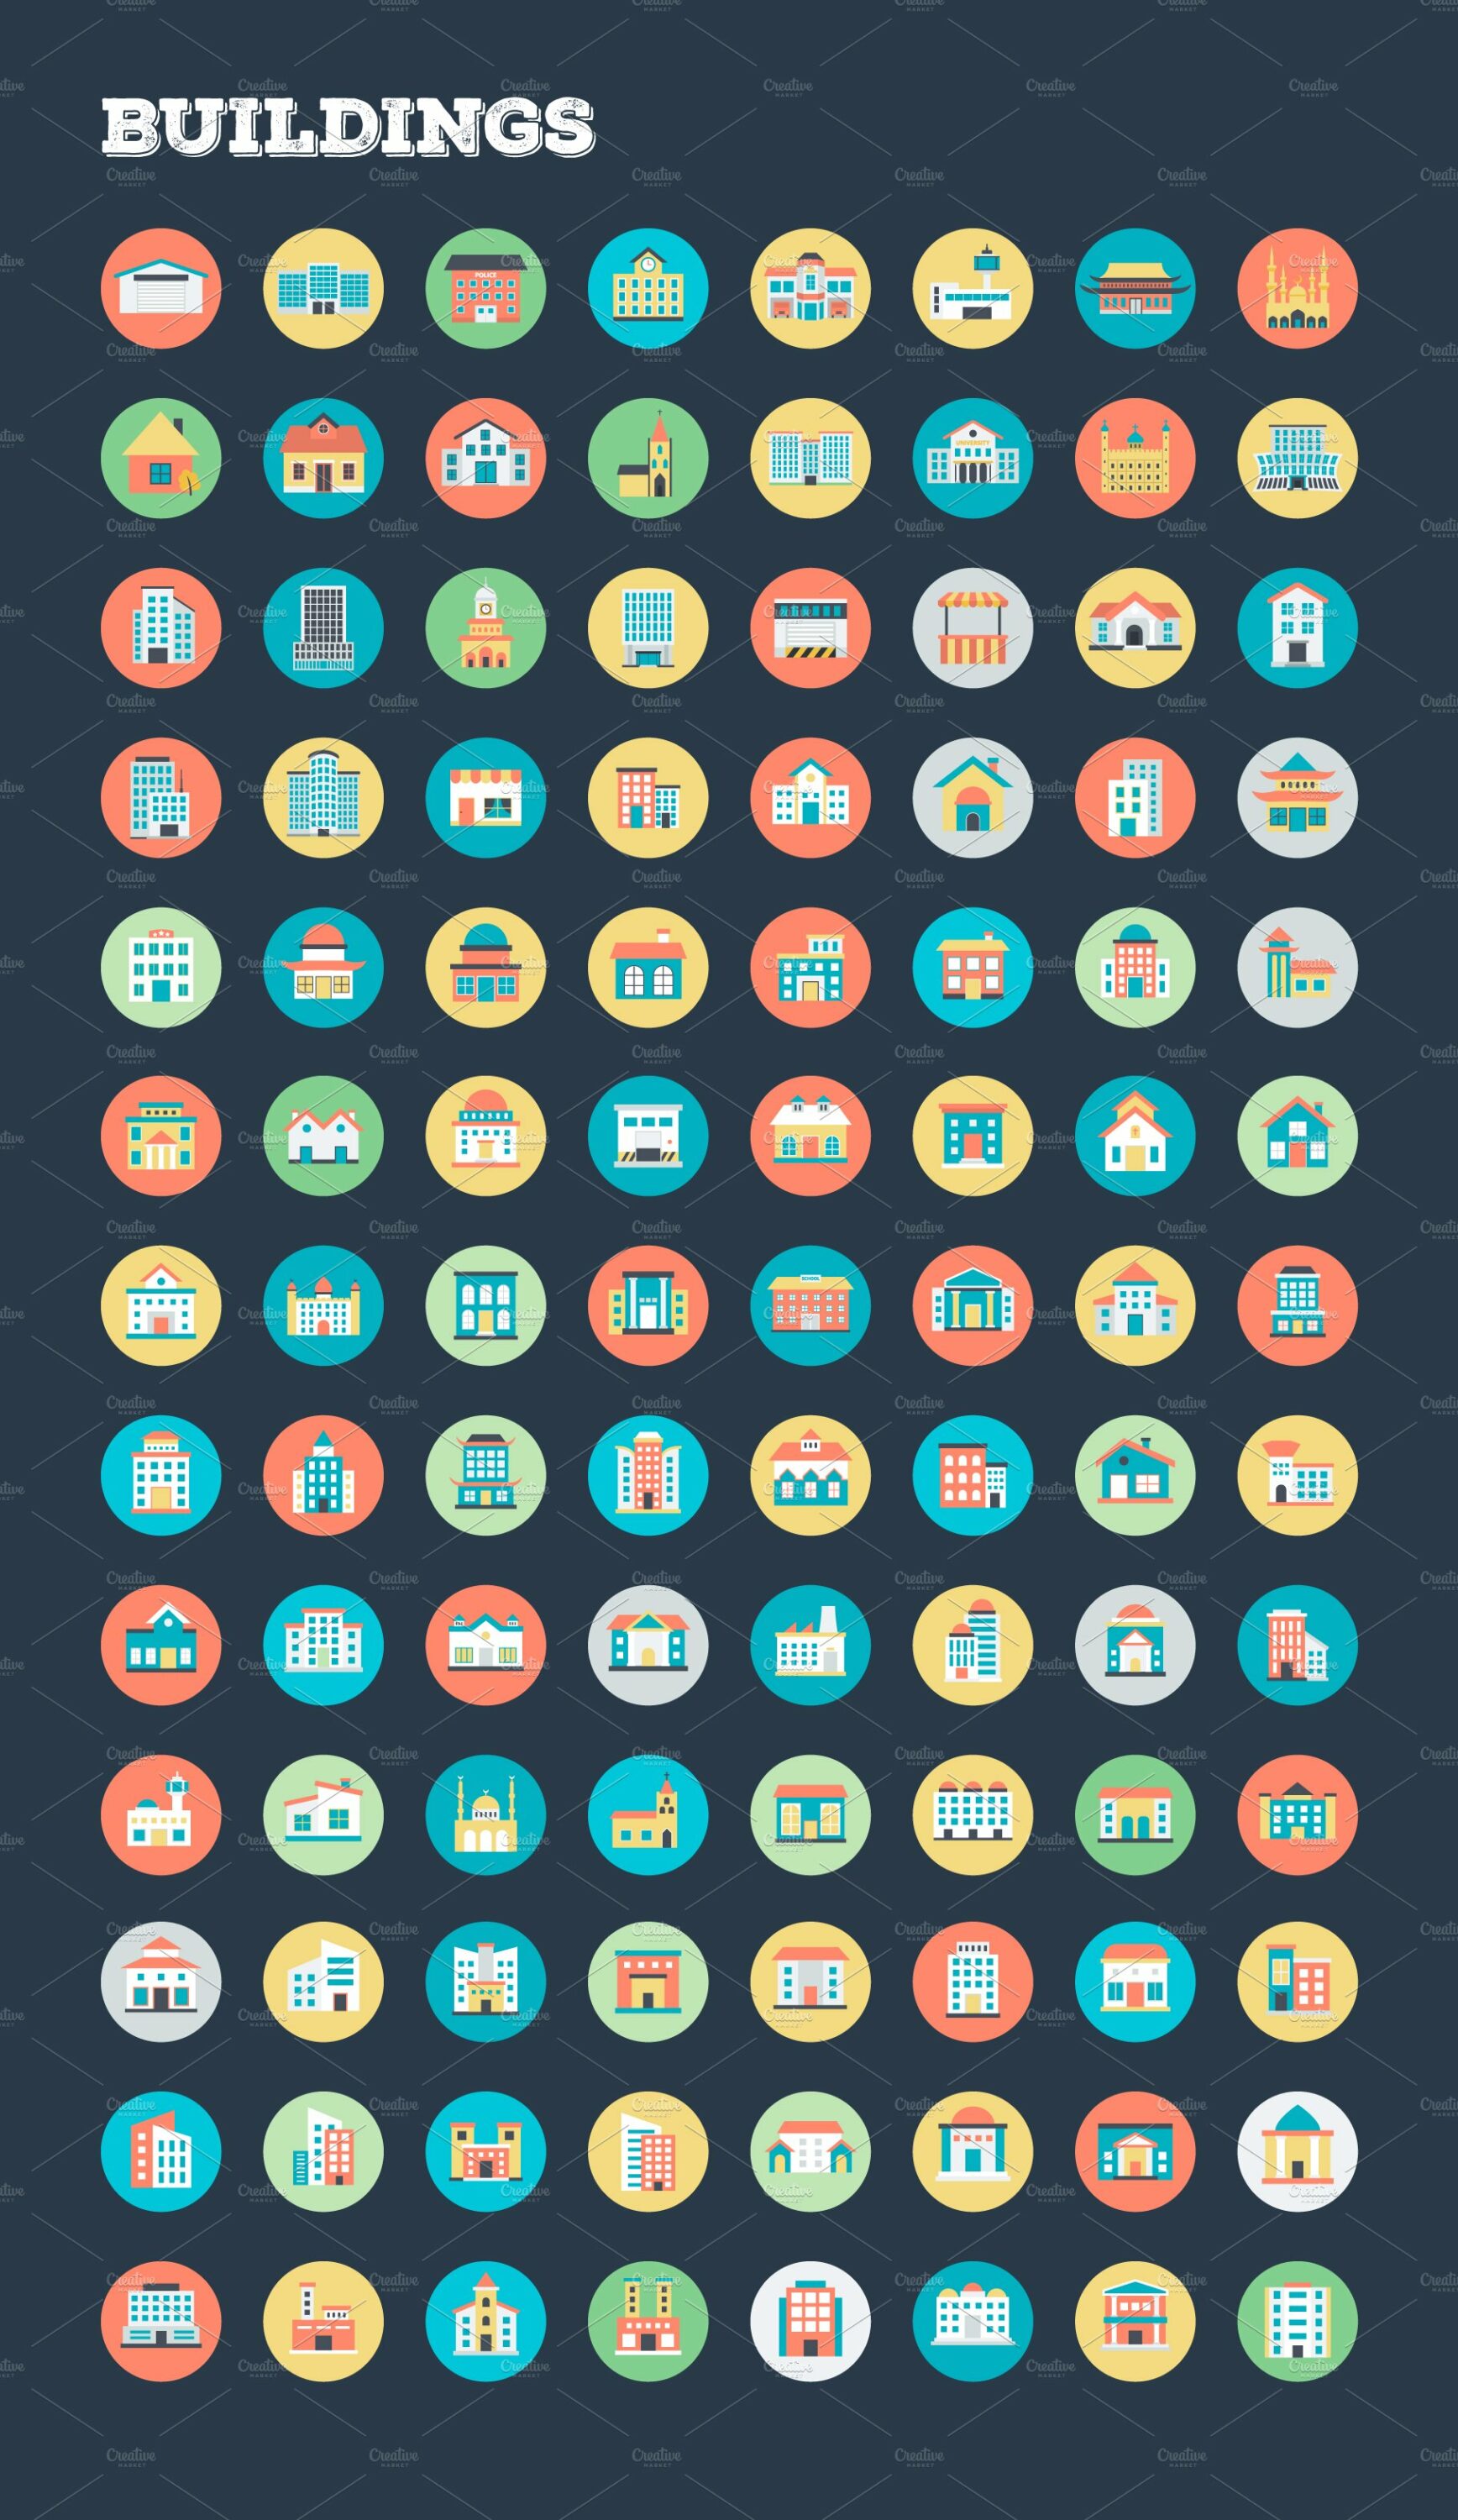 Colorful icons for building industry.